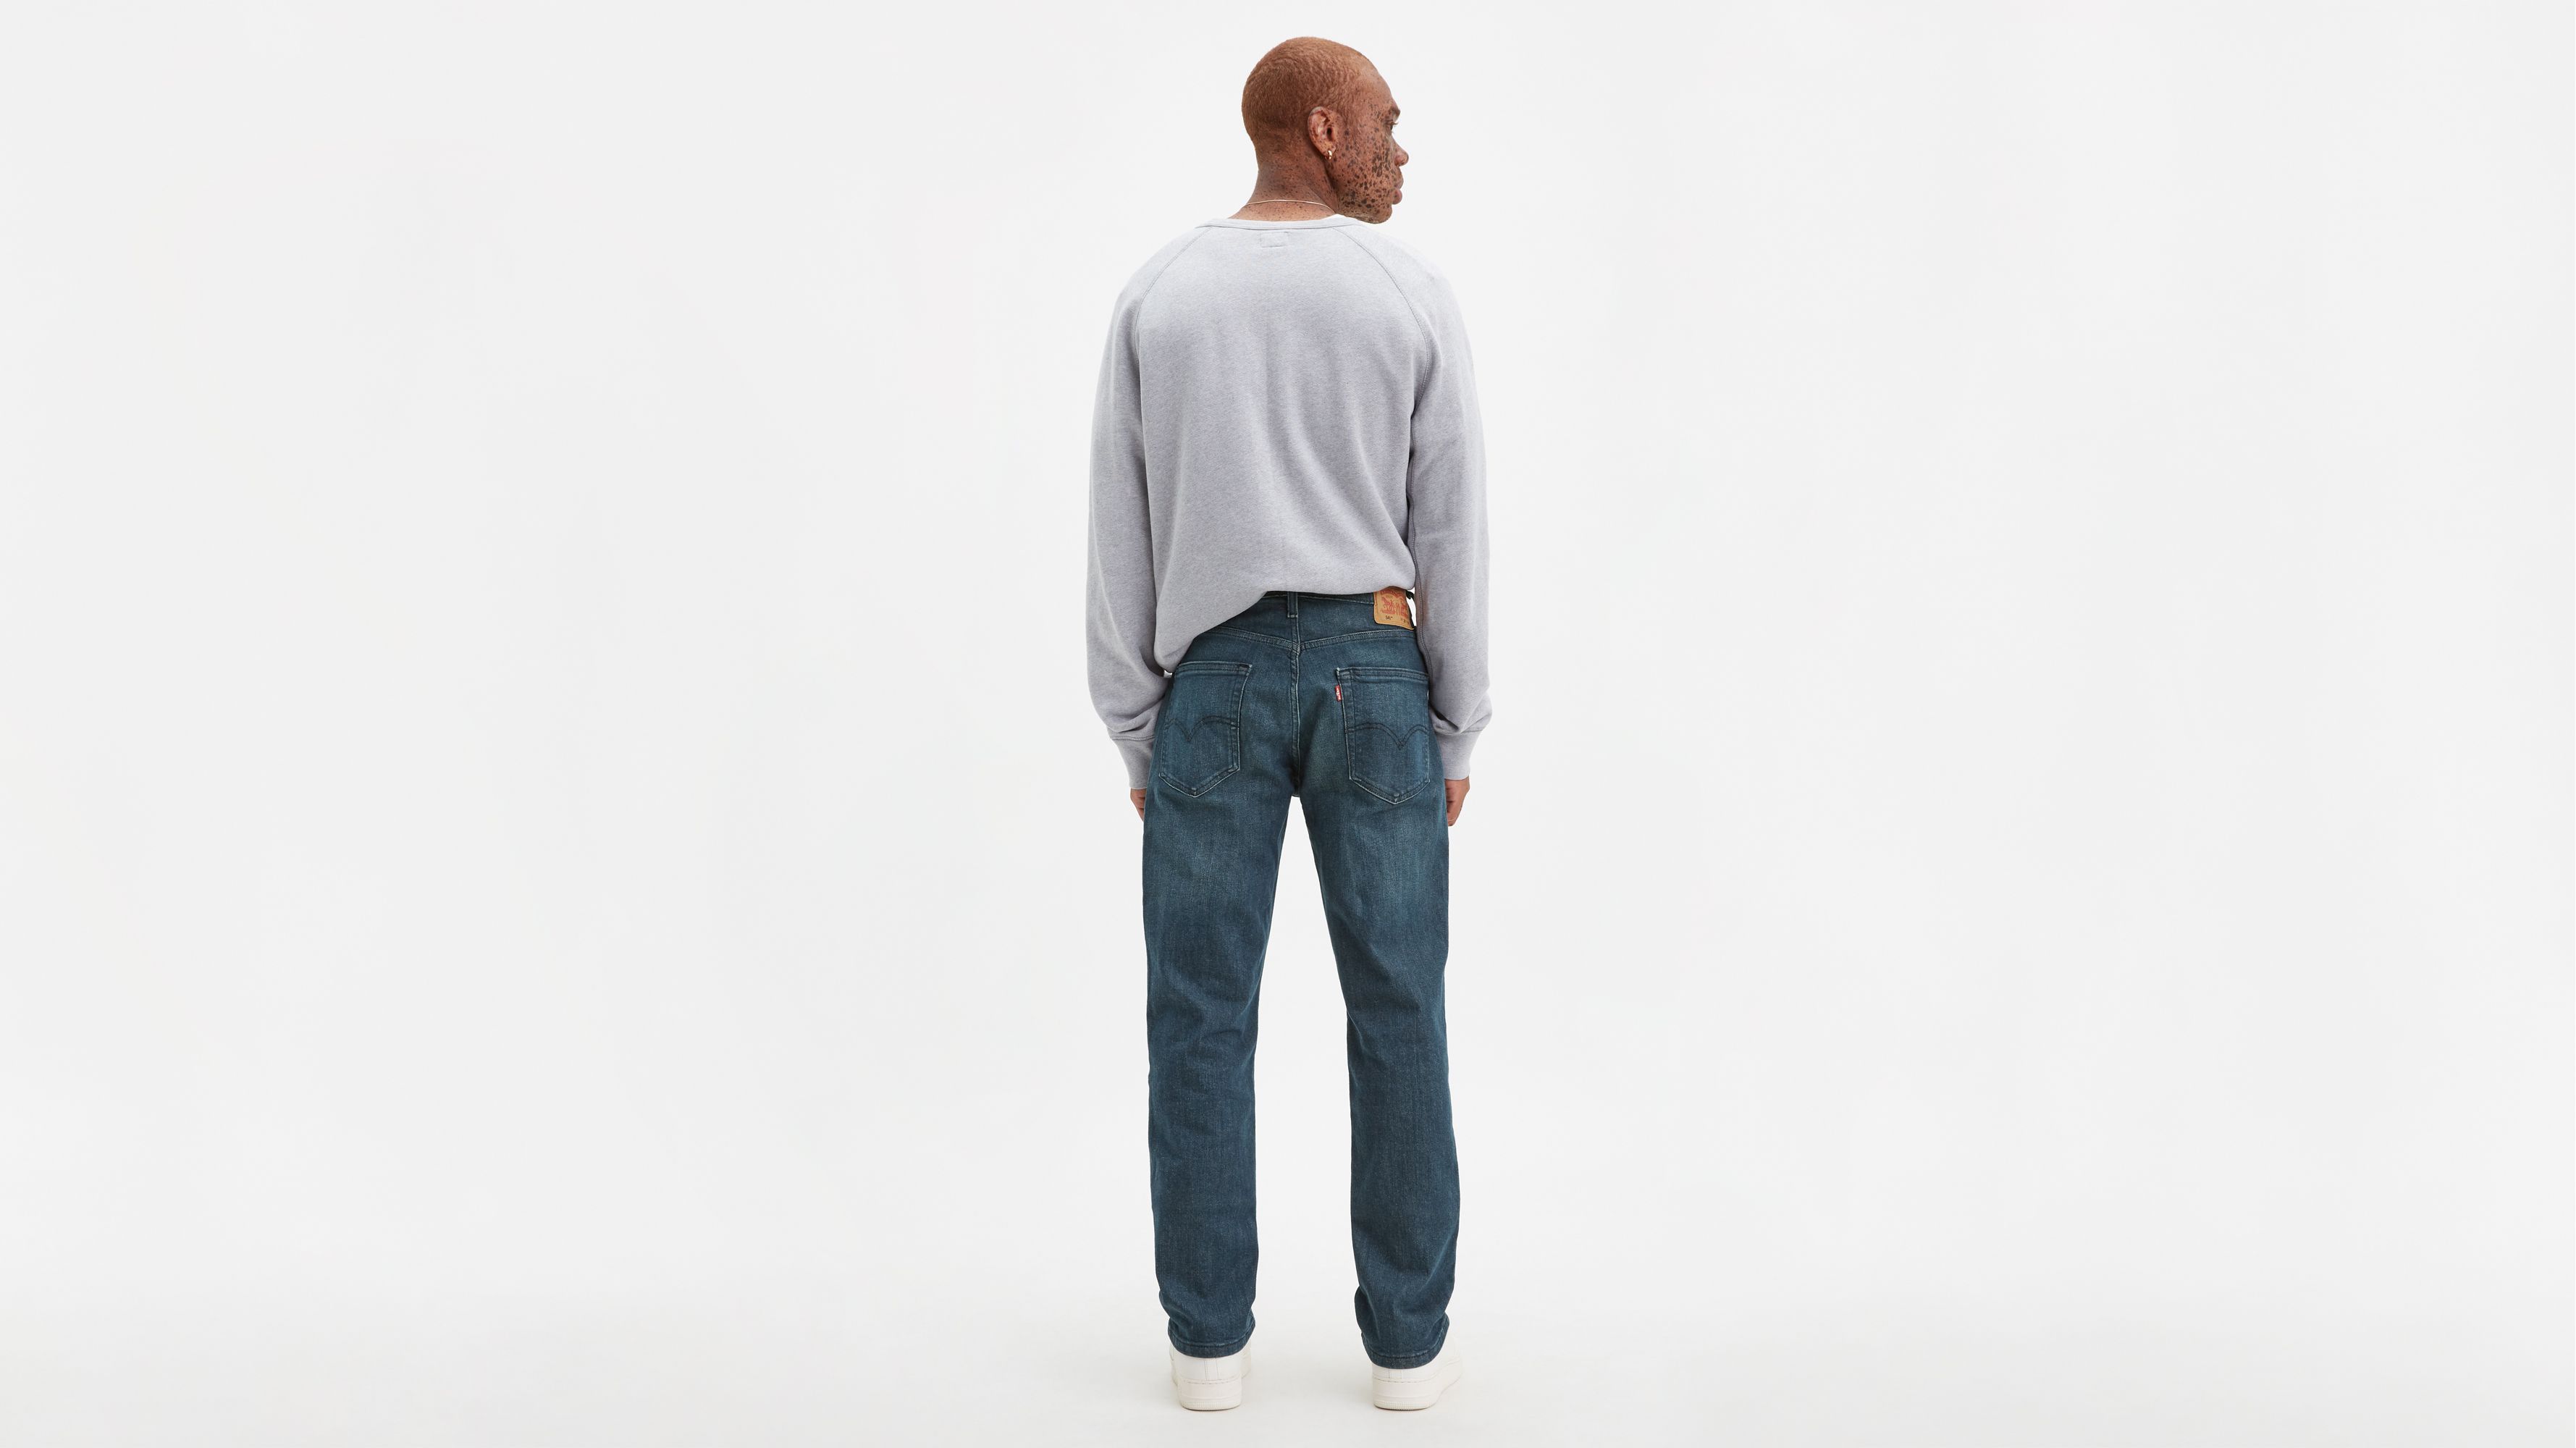 jeans similar to levis 541